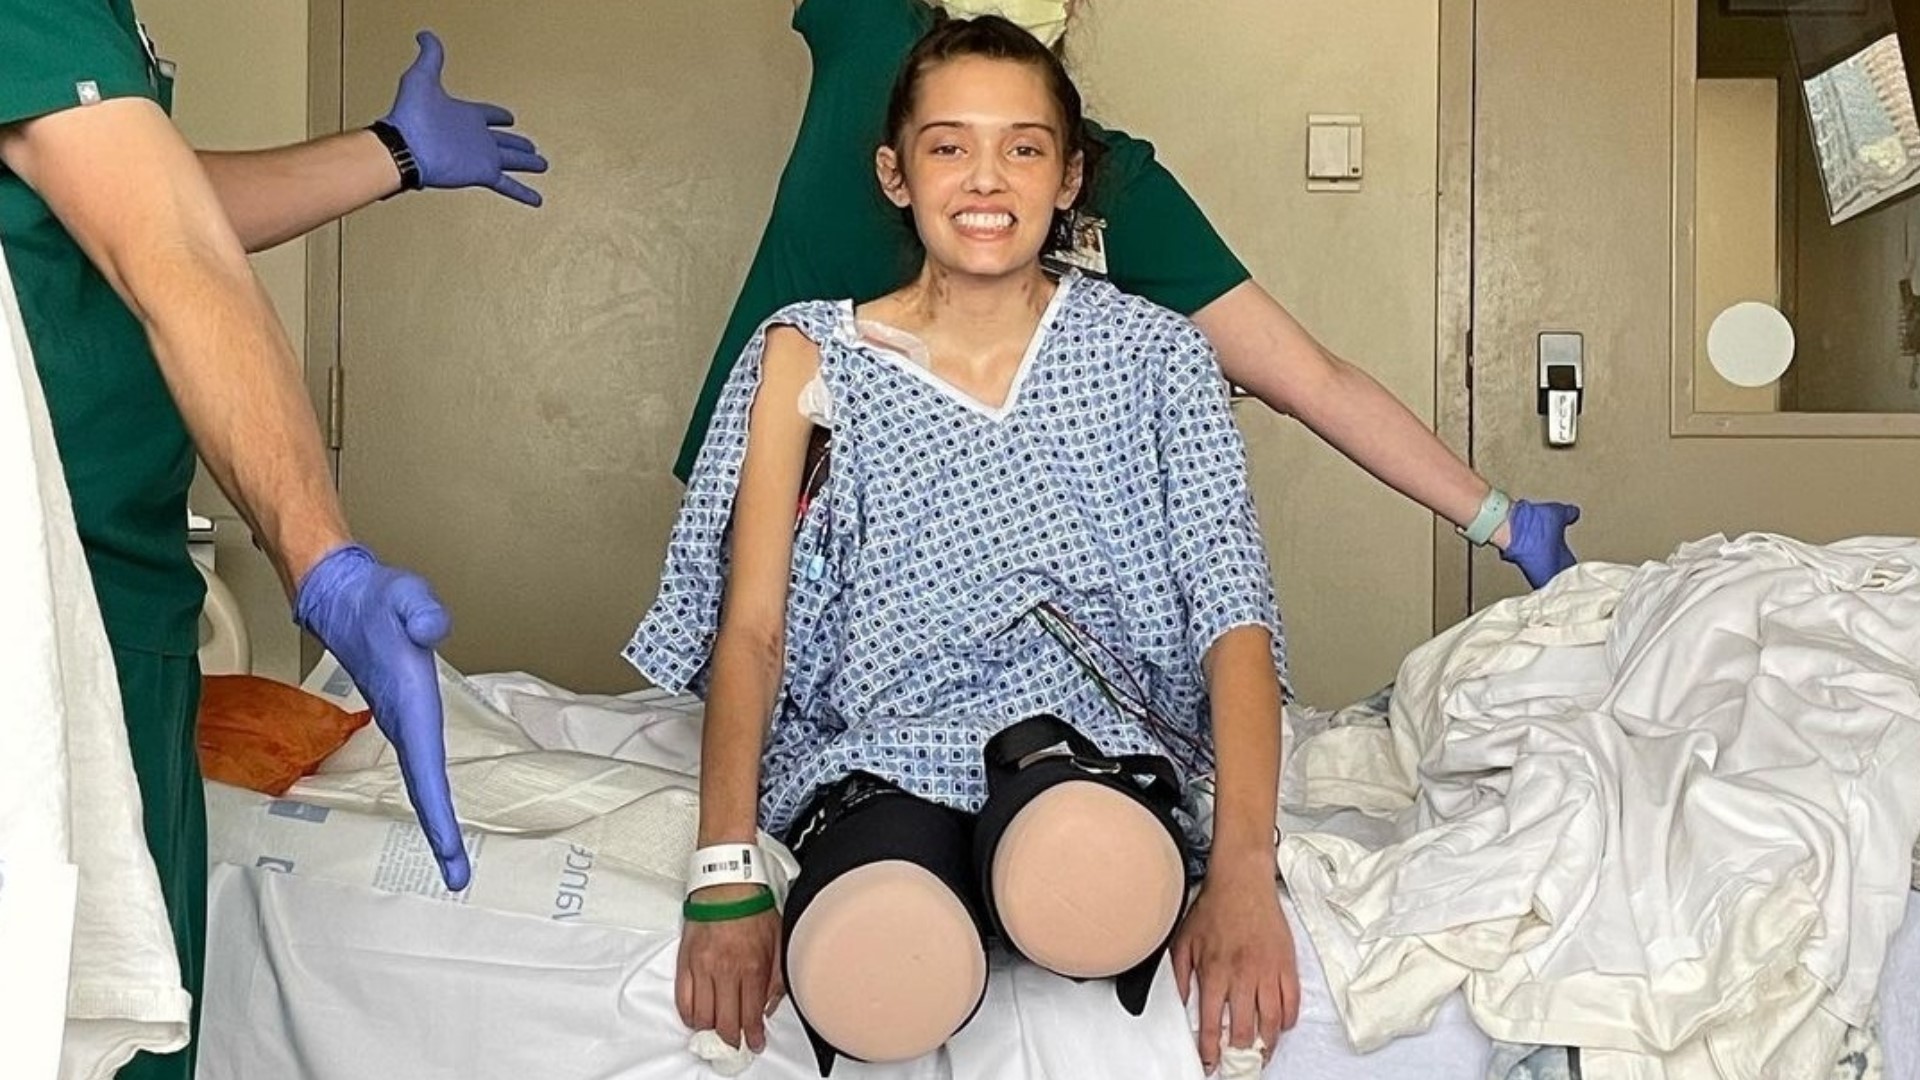 Claire Bridges was brought to Tampa General Hospital in January after contracting COVID. Bridges has a heart condition and faced numerous health conditions.